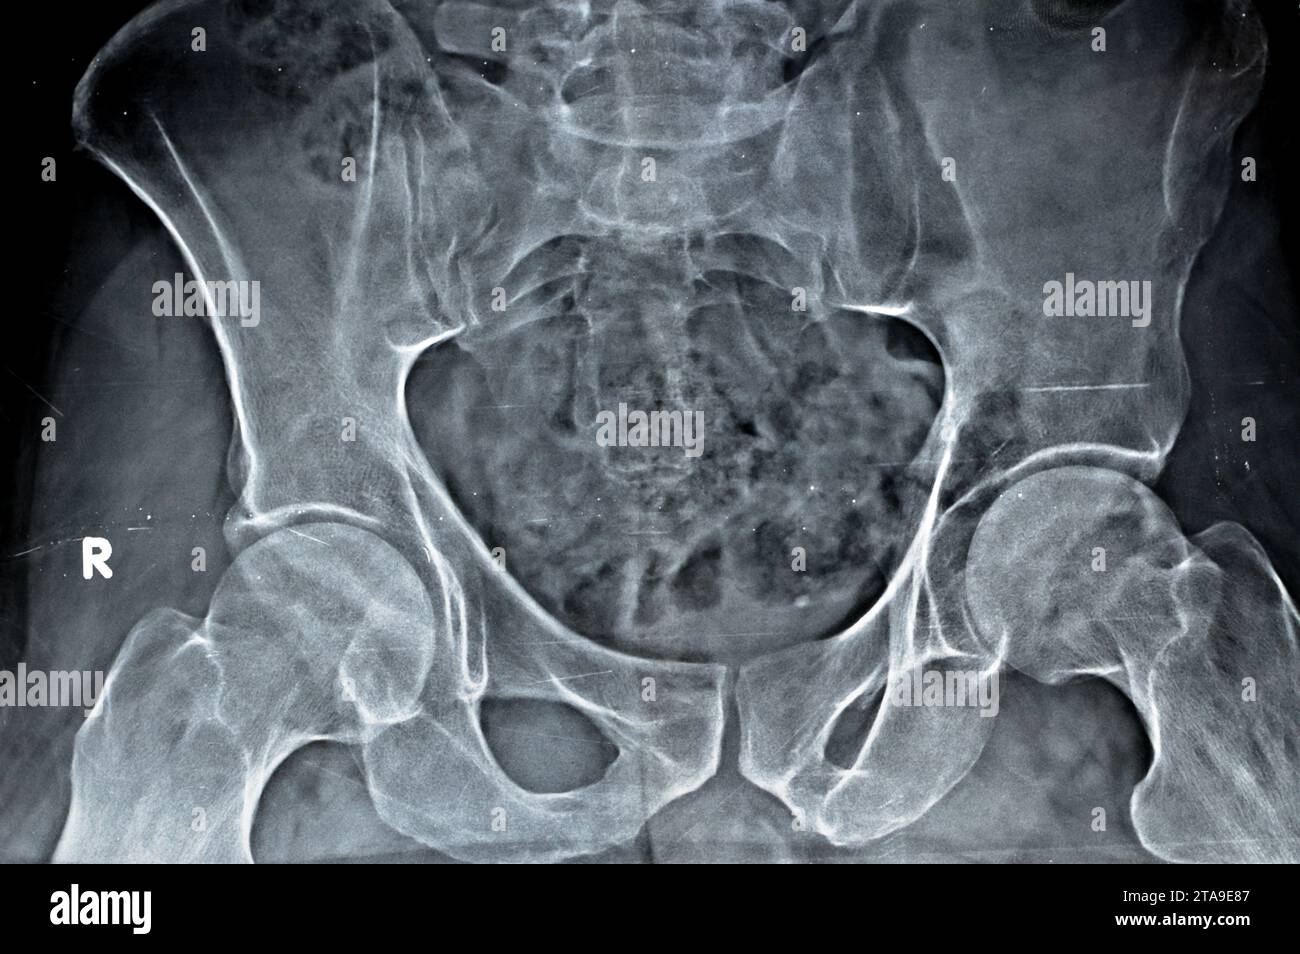 Plain X-ray of both hip joints revealed slight narrowing of superolateral aspect of both hip joints spaces with subchondral sclerosis of the opposed a Stock Photo